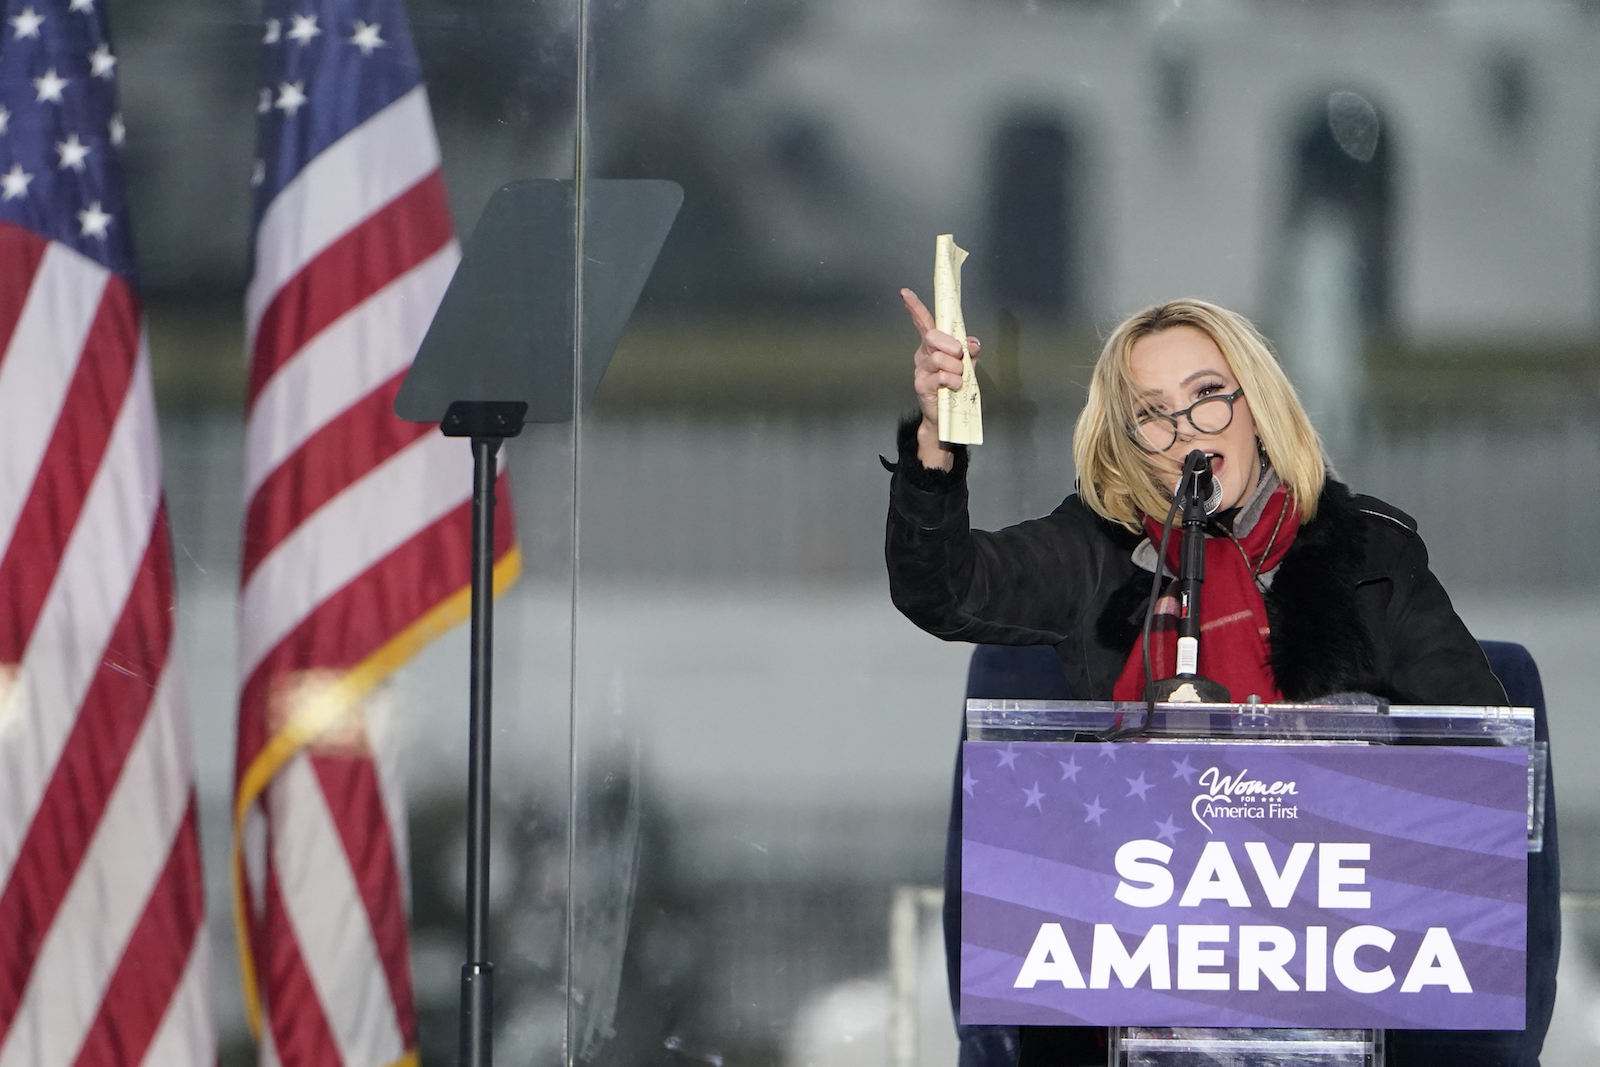 In this Jan. 6, 2021, file photo, Pastor Paula White leads a prayer in Washington, at a rally in support of President Donald Trump called the "Save America Rally." (AP Photo/Jacquelyn Martin, File)